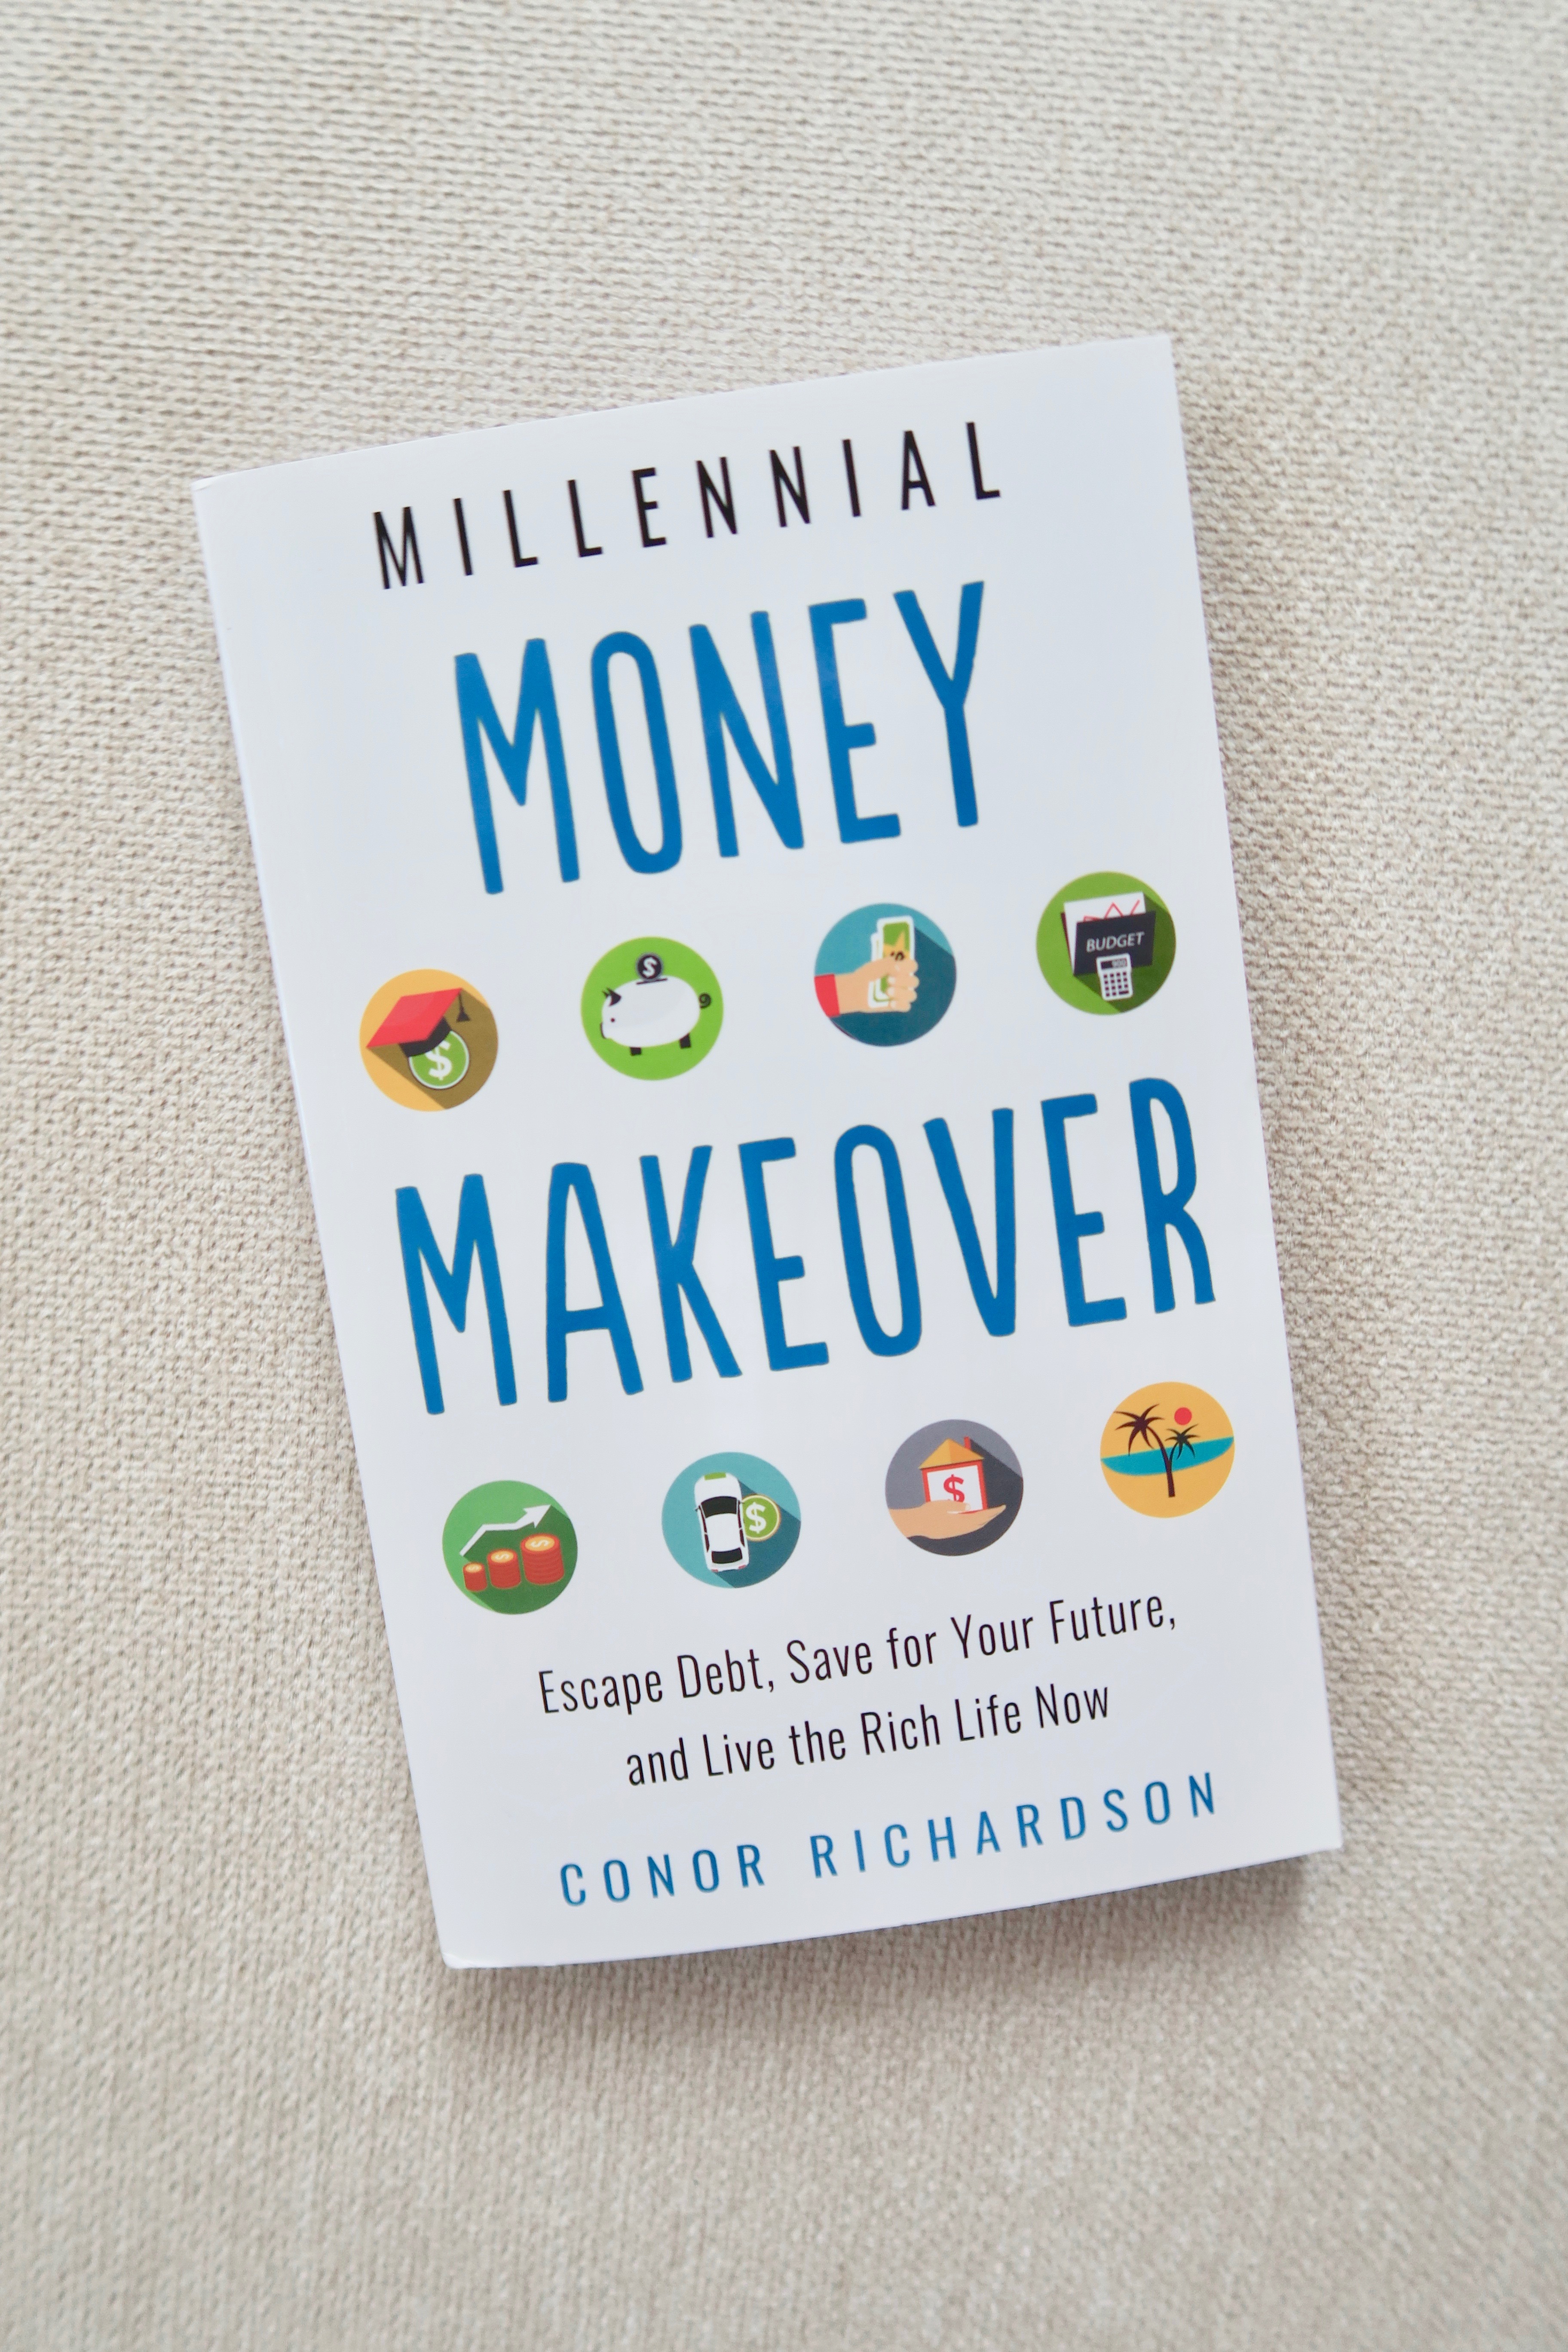 Millennial Money Makeover by Conor Richardson